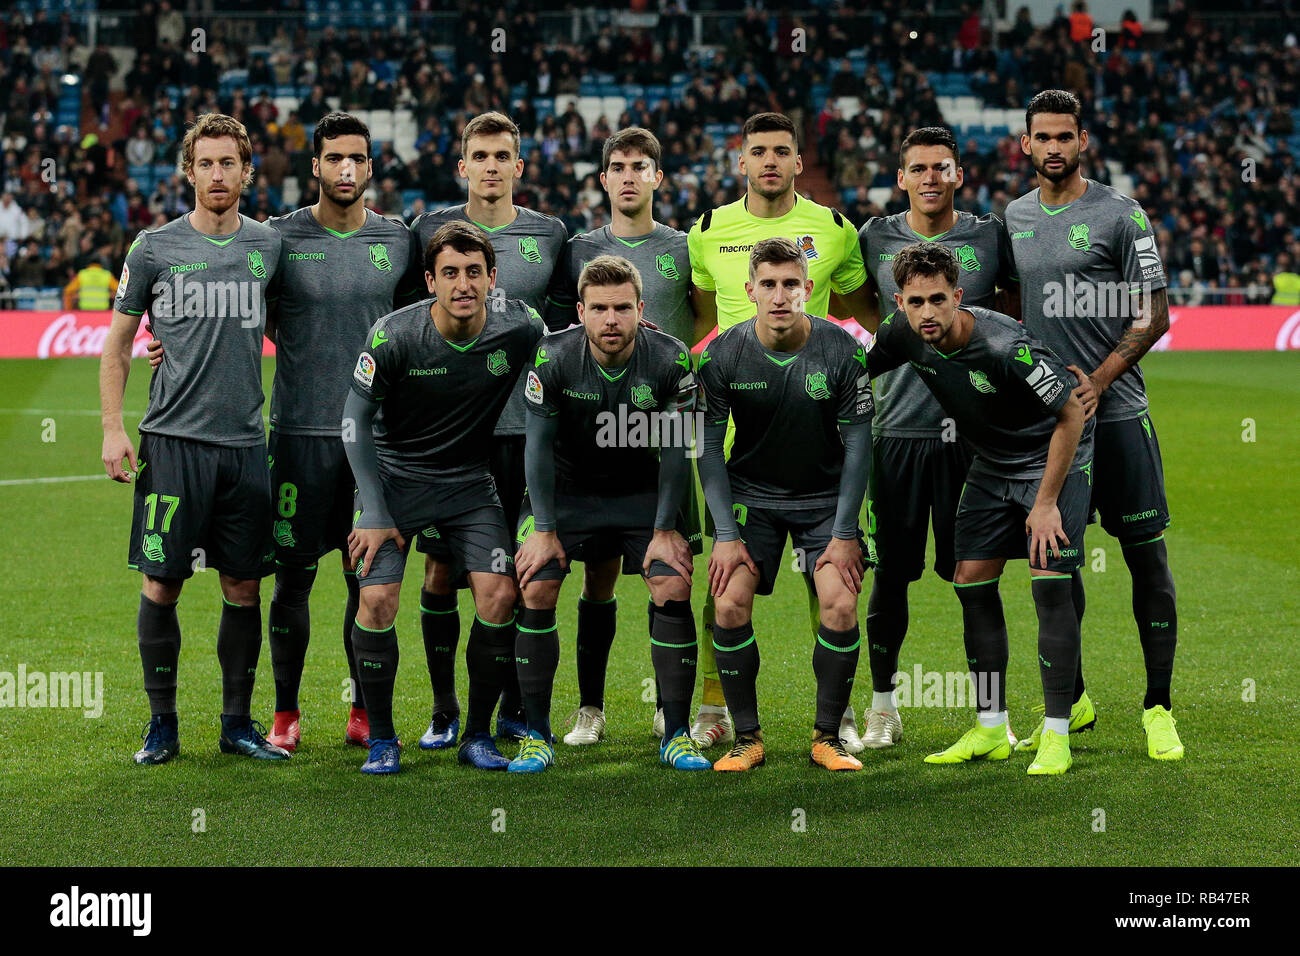 Madrid, Spain. 6th Jan 2019. Real Sociedad's team photo during La Liga match between Real Madrid and Real Sociedad at Santiago Bernabeu Stadium in Madrid. (Final score: Real Madrid 0 - Real Sociedad 2) Credit: SOPA Images Limited/Alamy Live News Stock Photo